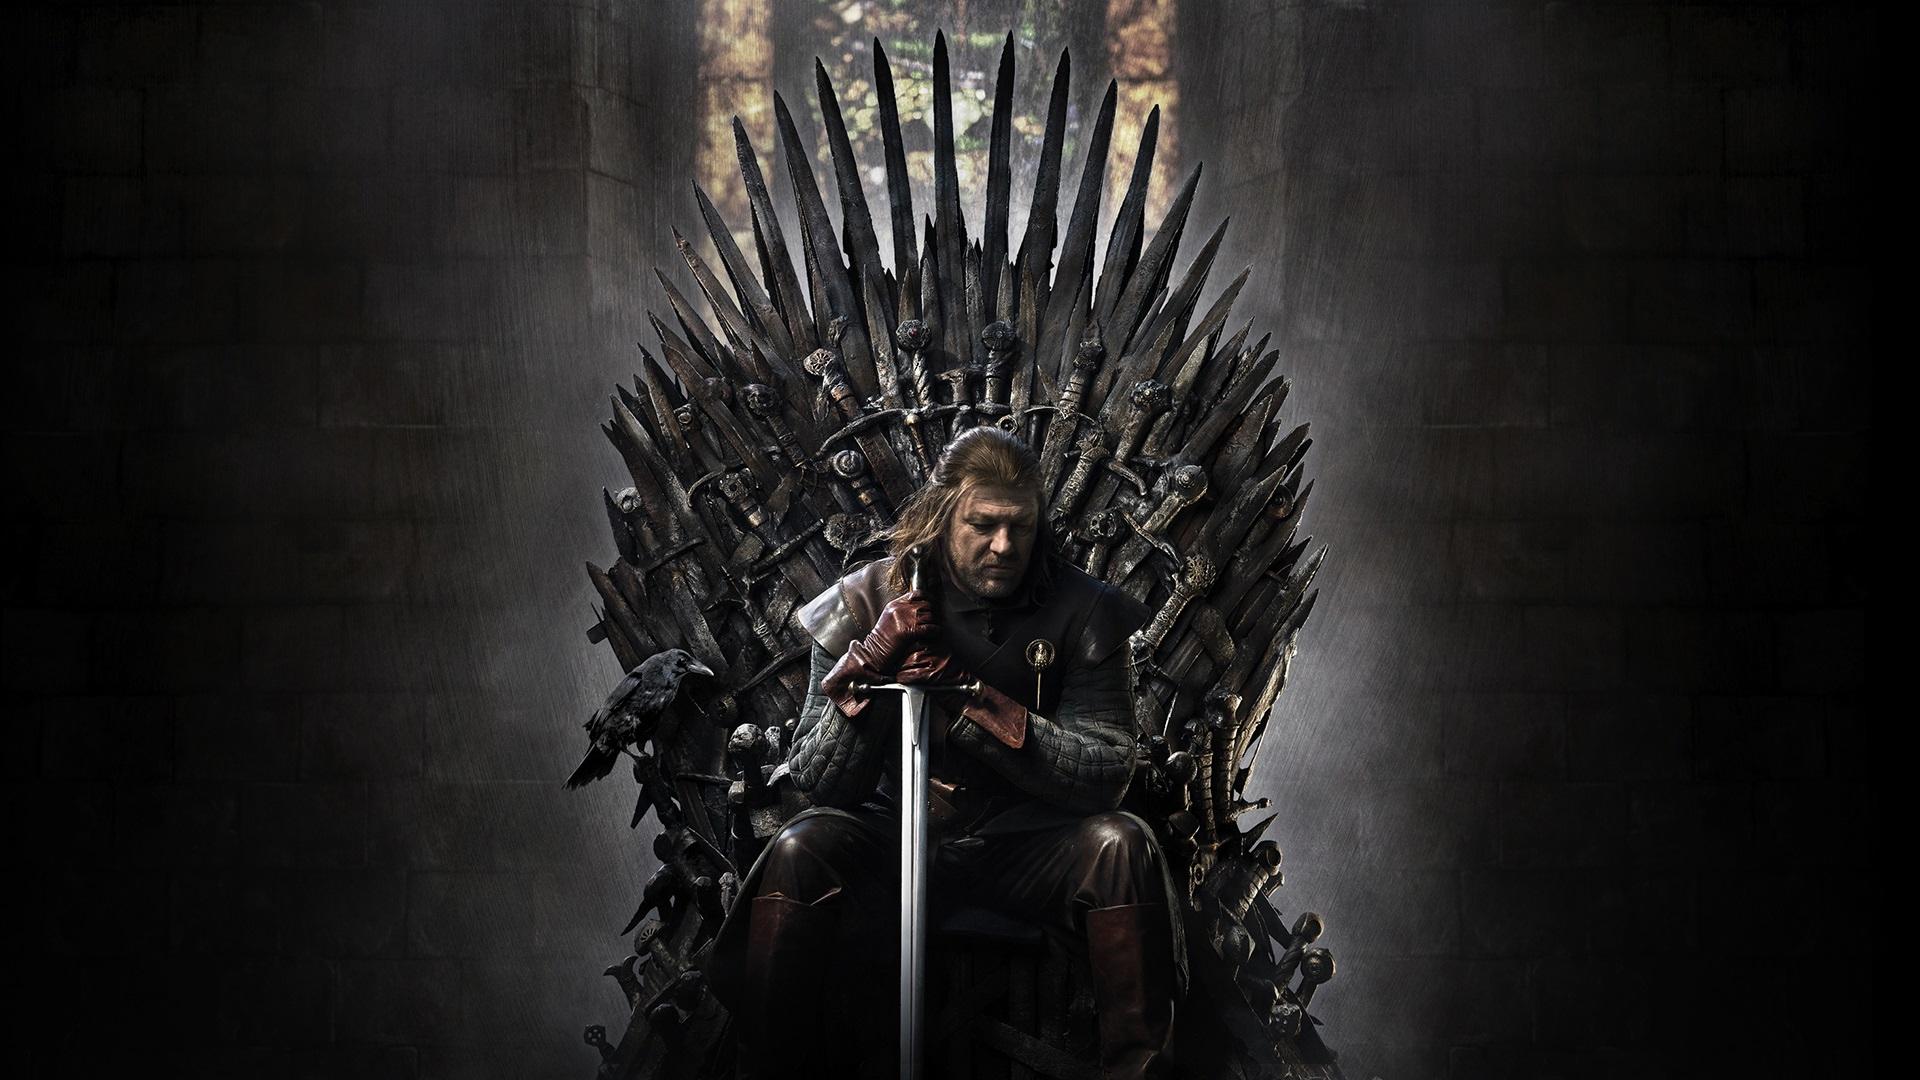 HBO scattered six Iron Thrones around the world ahead